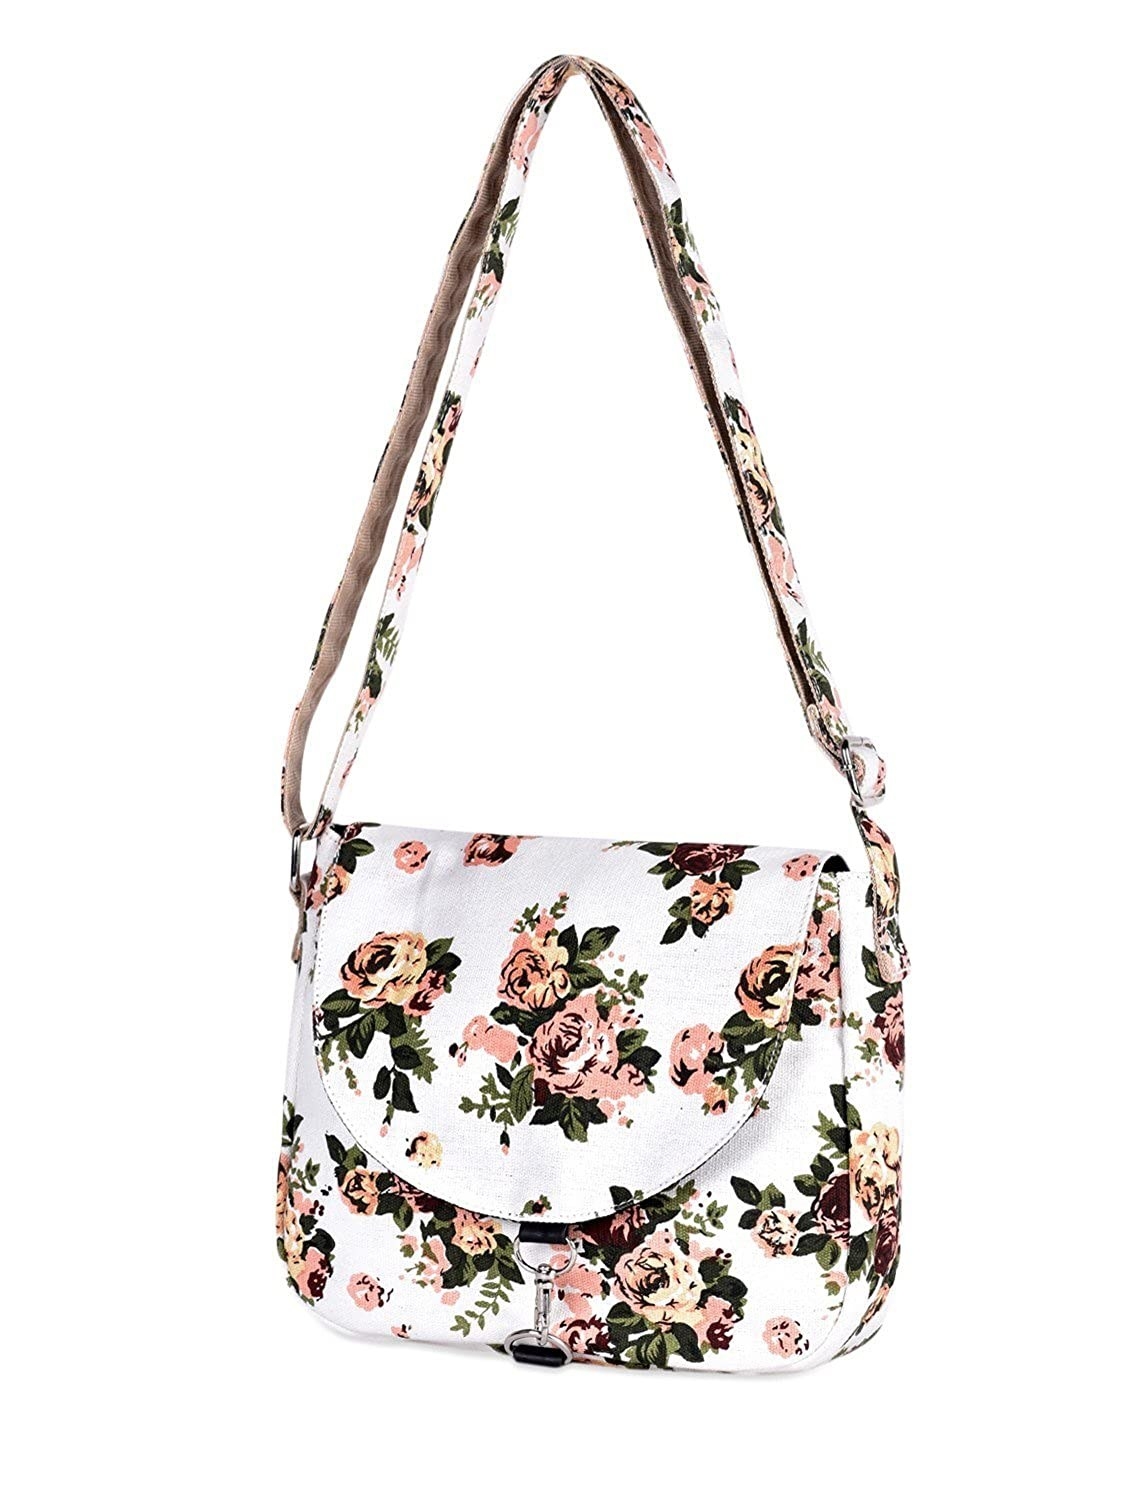 A white sling bag with pink flowers and green leaves printed all over it